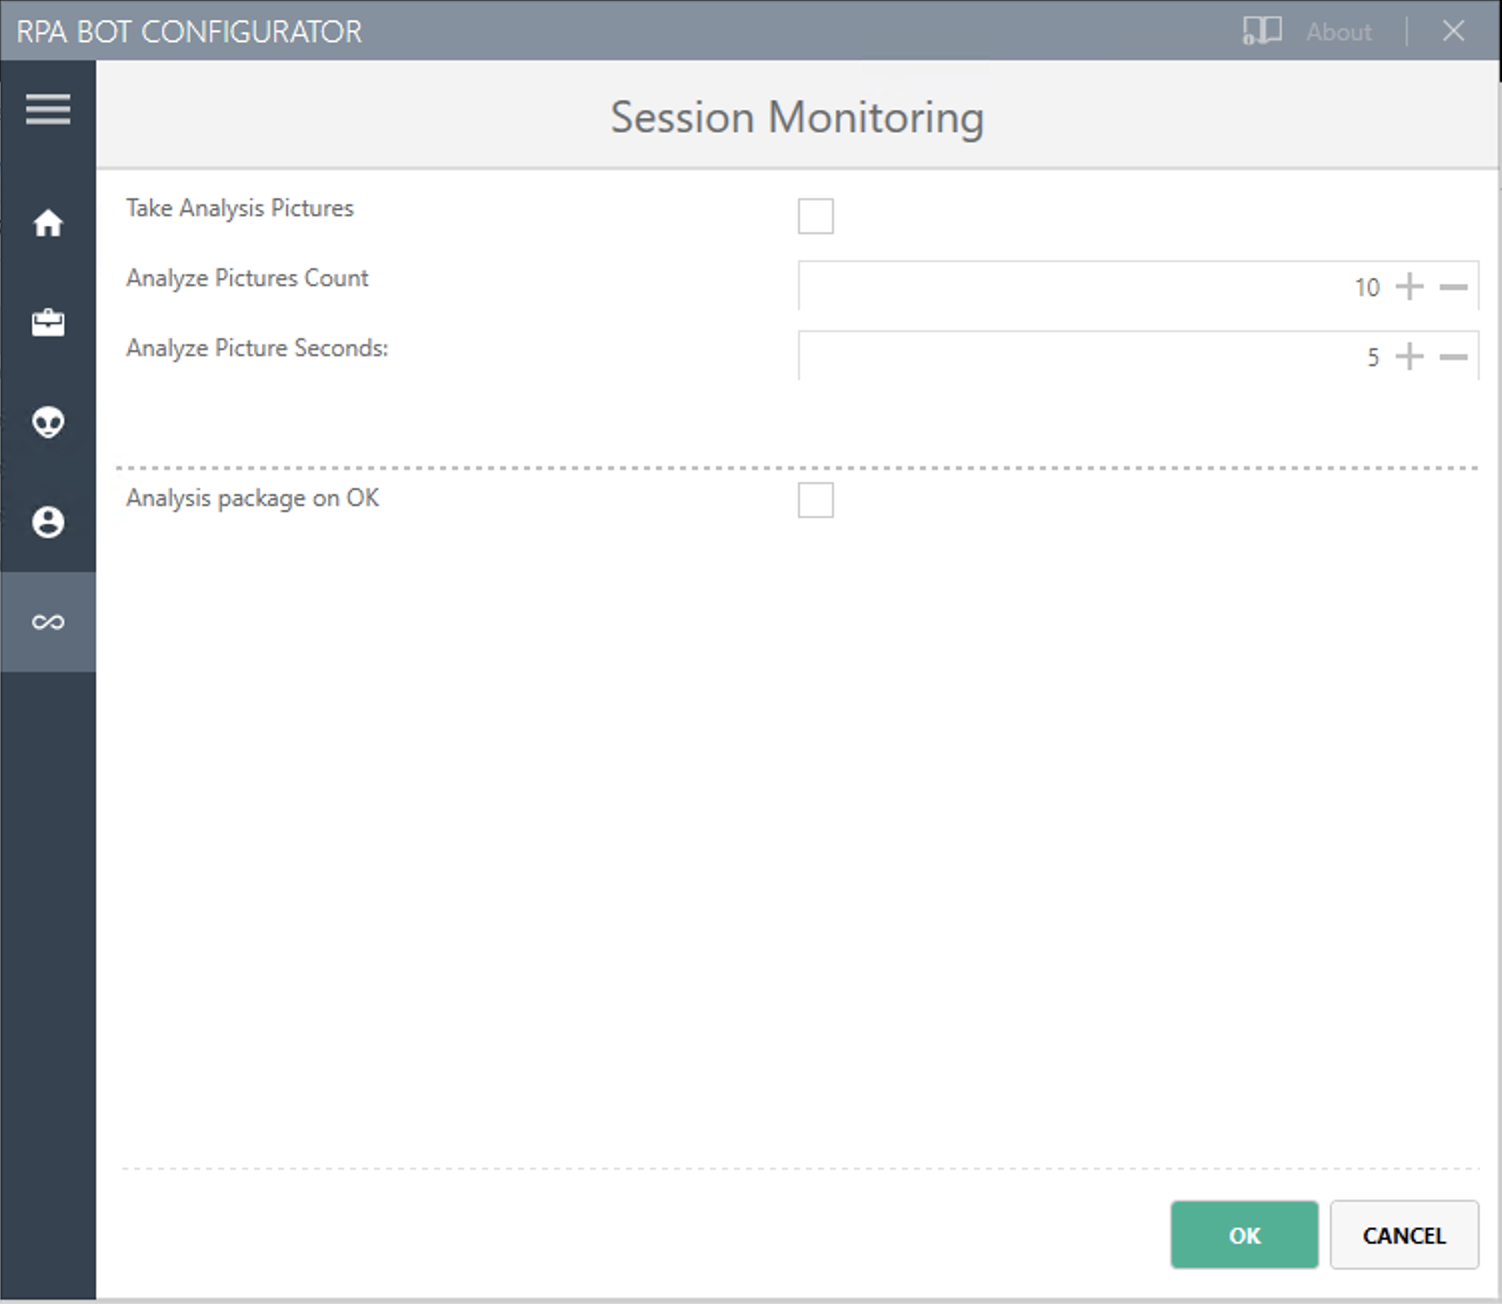 The RPA Bot configurator application showing the Session Monitoring settings panel